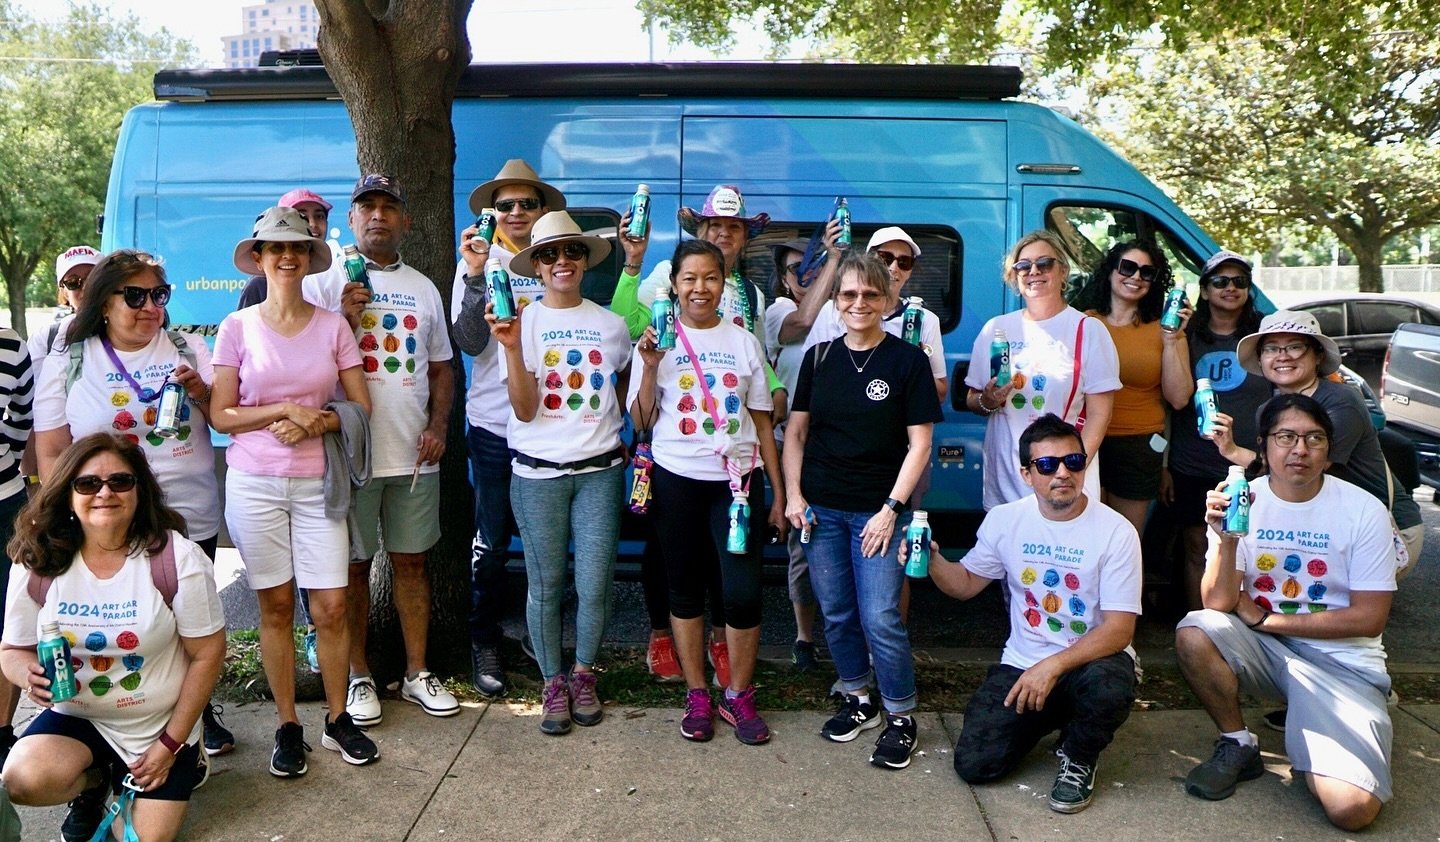 Cheers-Art Car Parade Walk! It&rsquo;s always a good time when we connect with movement, nature, AND Art Cars!! Such a fun community day with Arts District Houston and Wellness Walkers. 
Special thank you to HOW Water for keeping us hydrated! A Houst